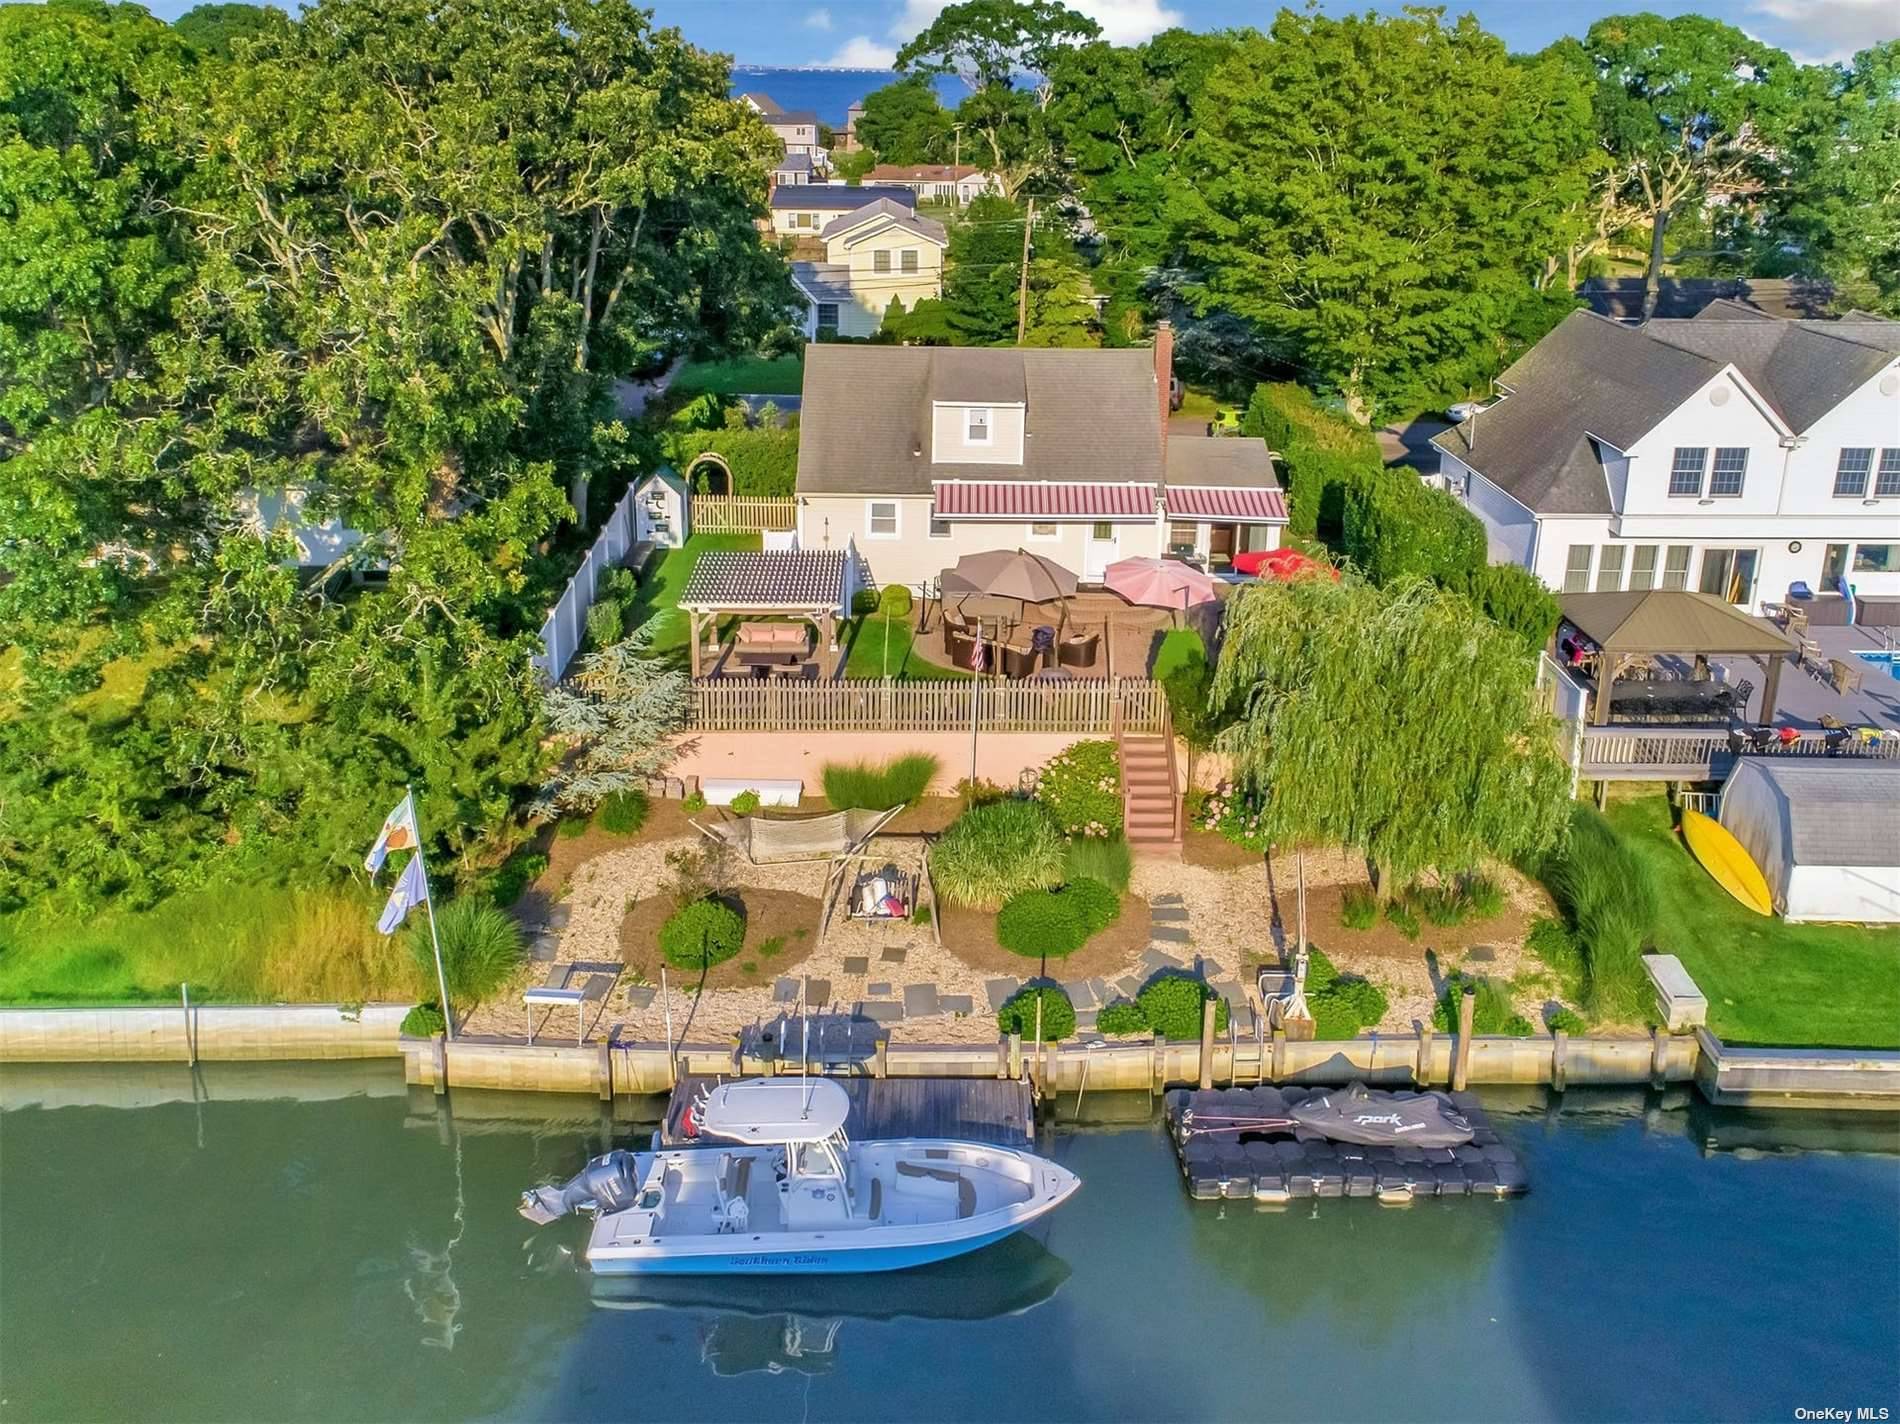 Located on Shinnecock Bay tucked away in the southern part of East Quogue is this private community.